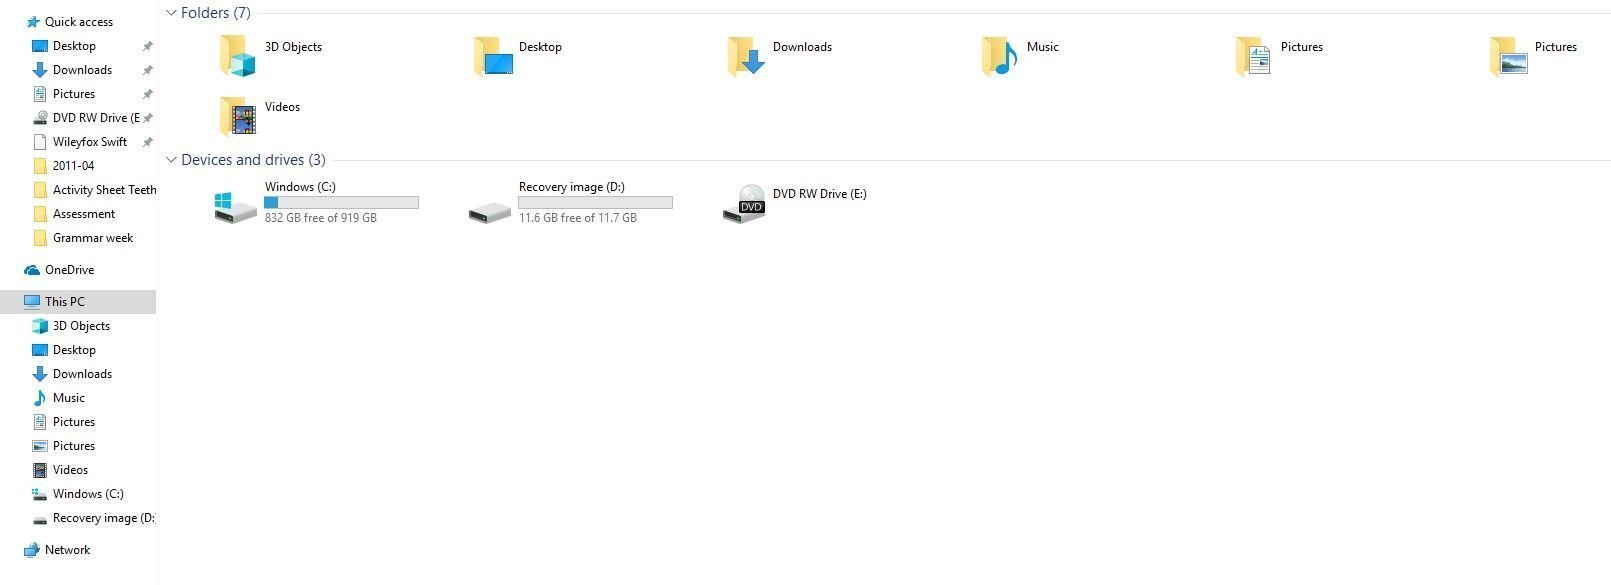 My documents and pictures folders are merged after i changed the directory to onedrive and... 50a05c85-20e9-4eaa-aadc-a41296746d5c?upload=true.jpg